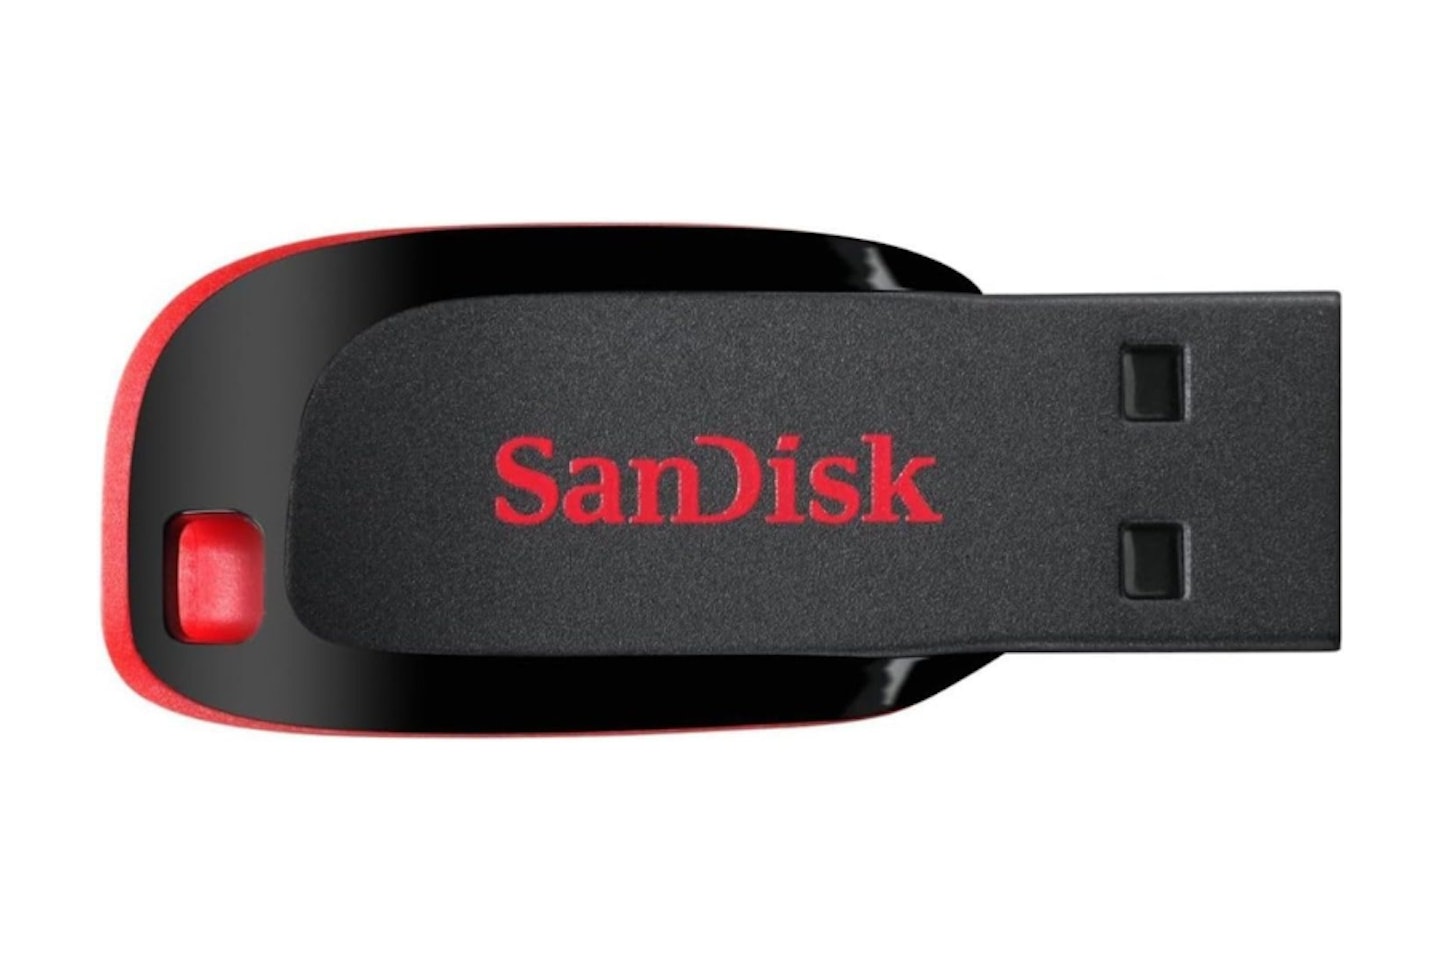 SanDisk Cruzer Blade 16GB USB Flash Drive - one of the best SanDisk USB stick devices